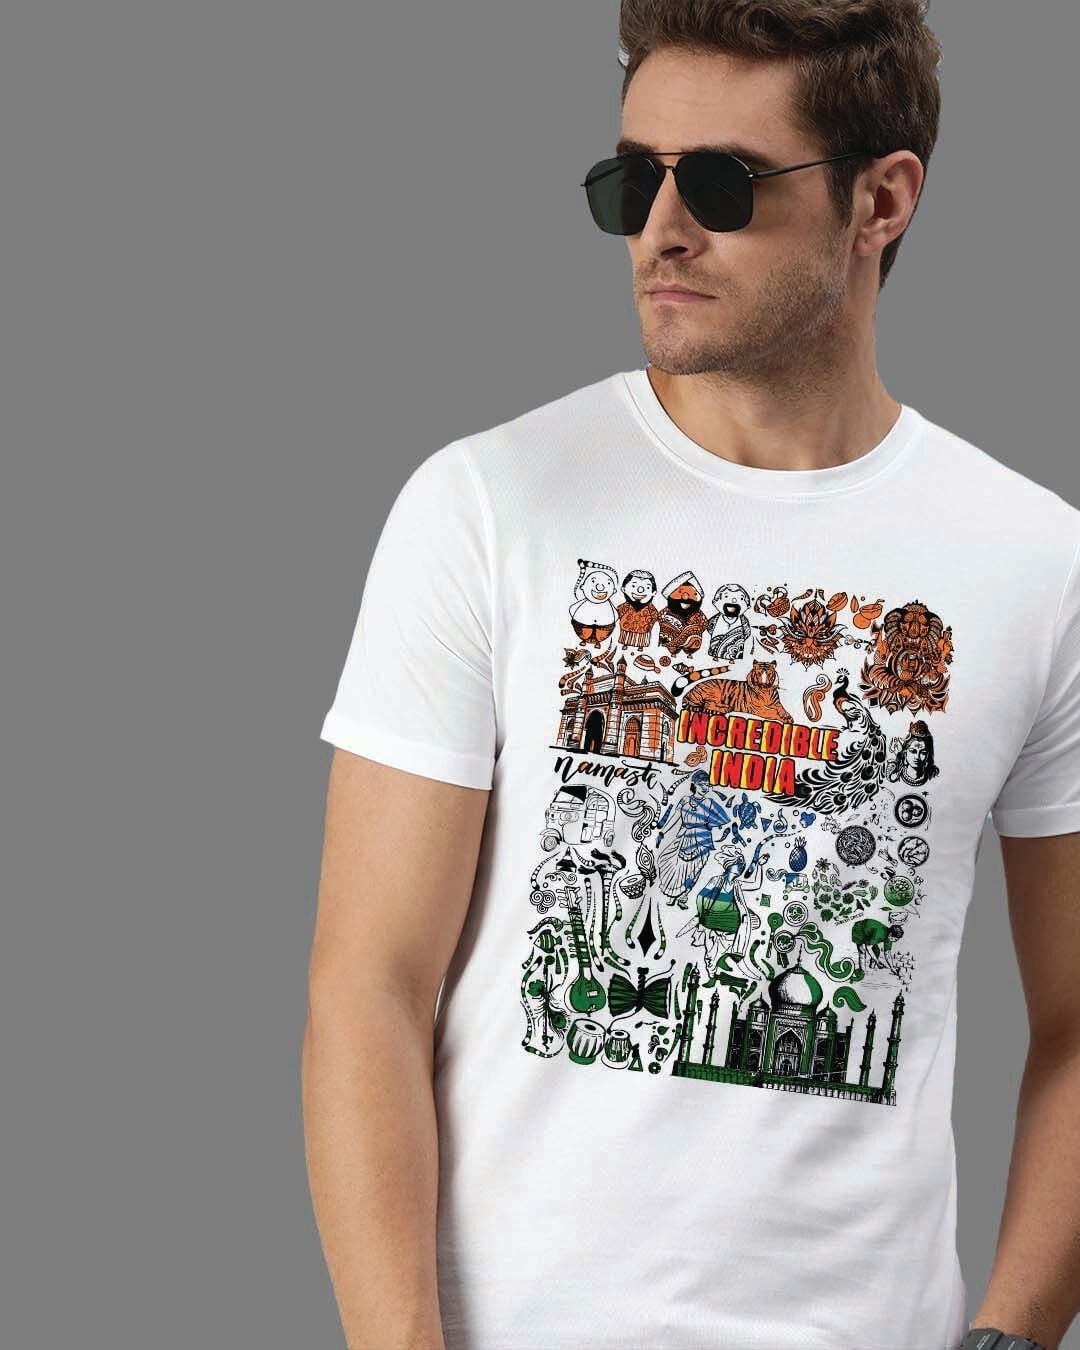 adviicd Mens Cotton T Shirts Casual Tee Men's India